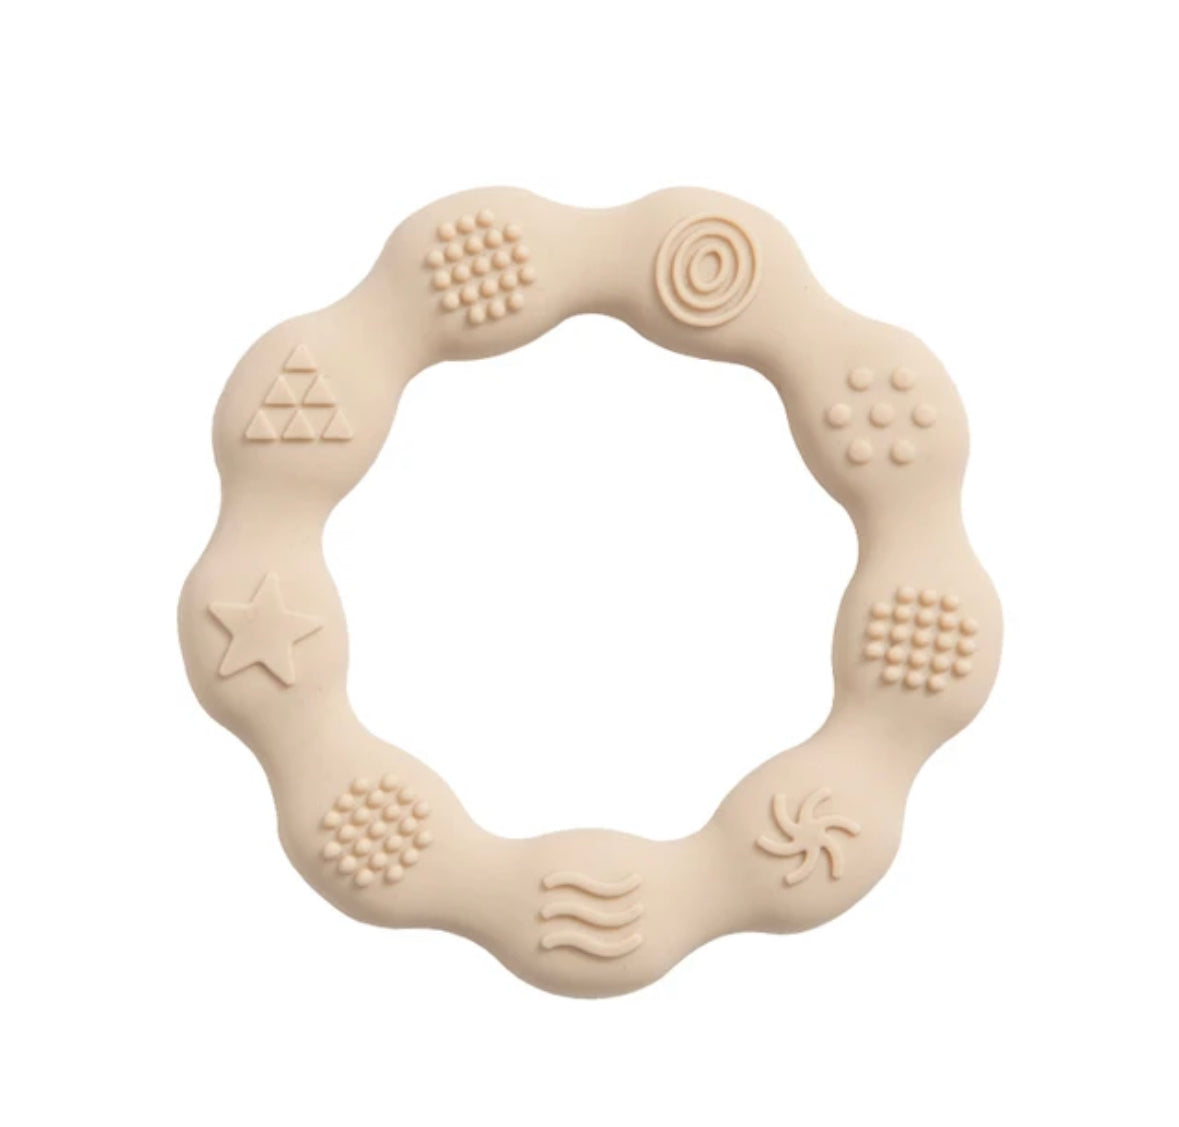 Mon Amour Silicone Teether Ring - Cream